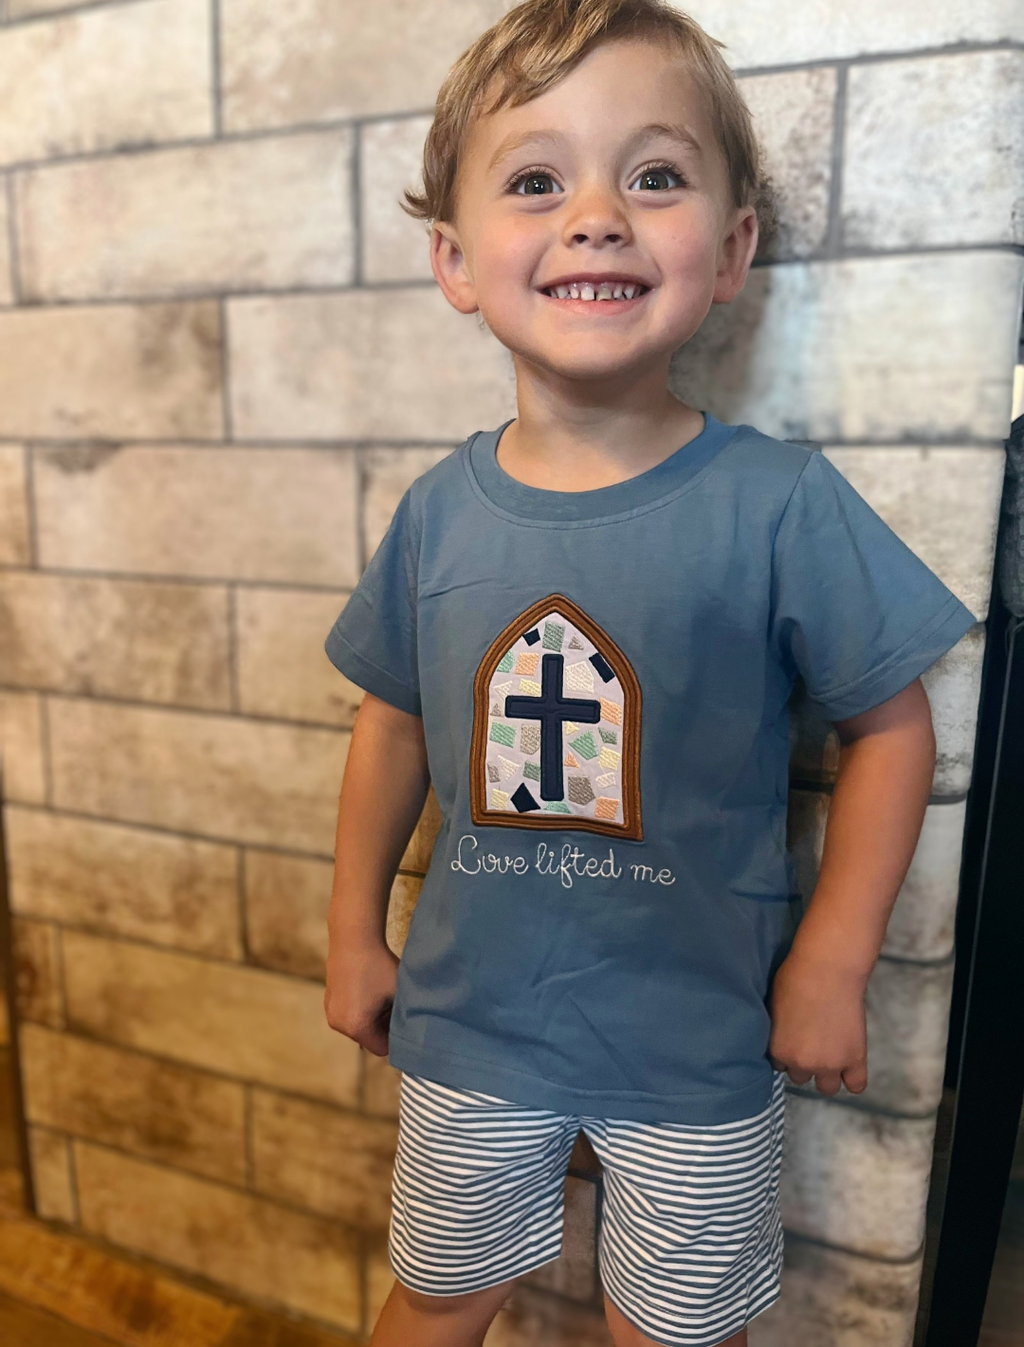 Stained Glass Love Lifted Me Boy Set